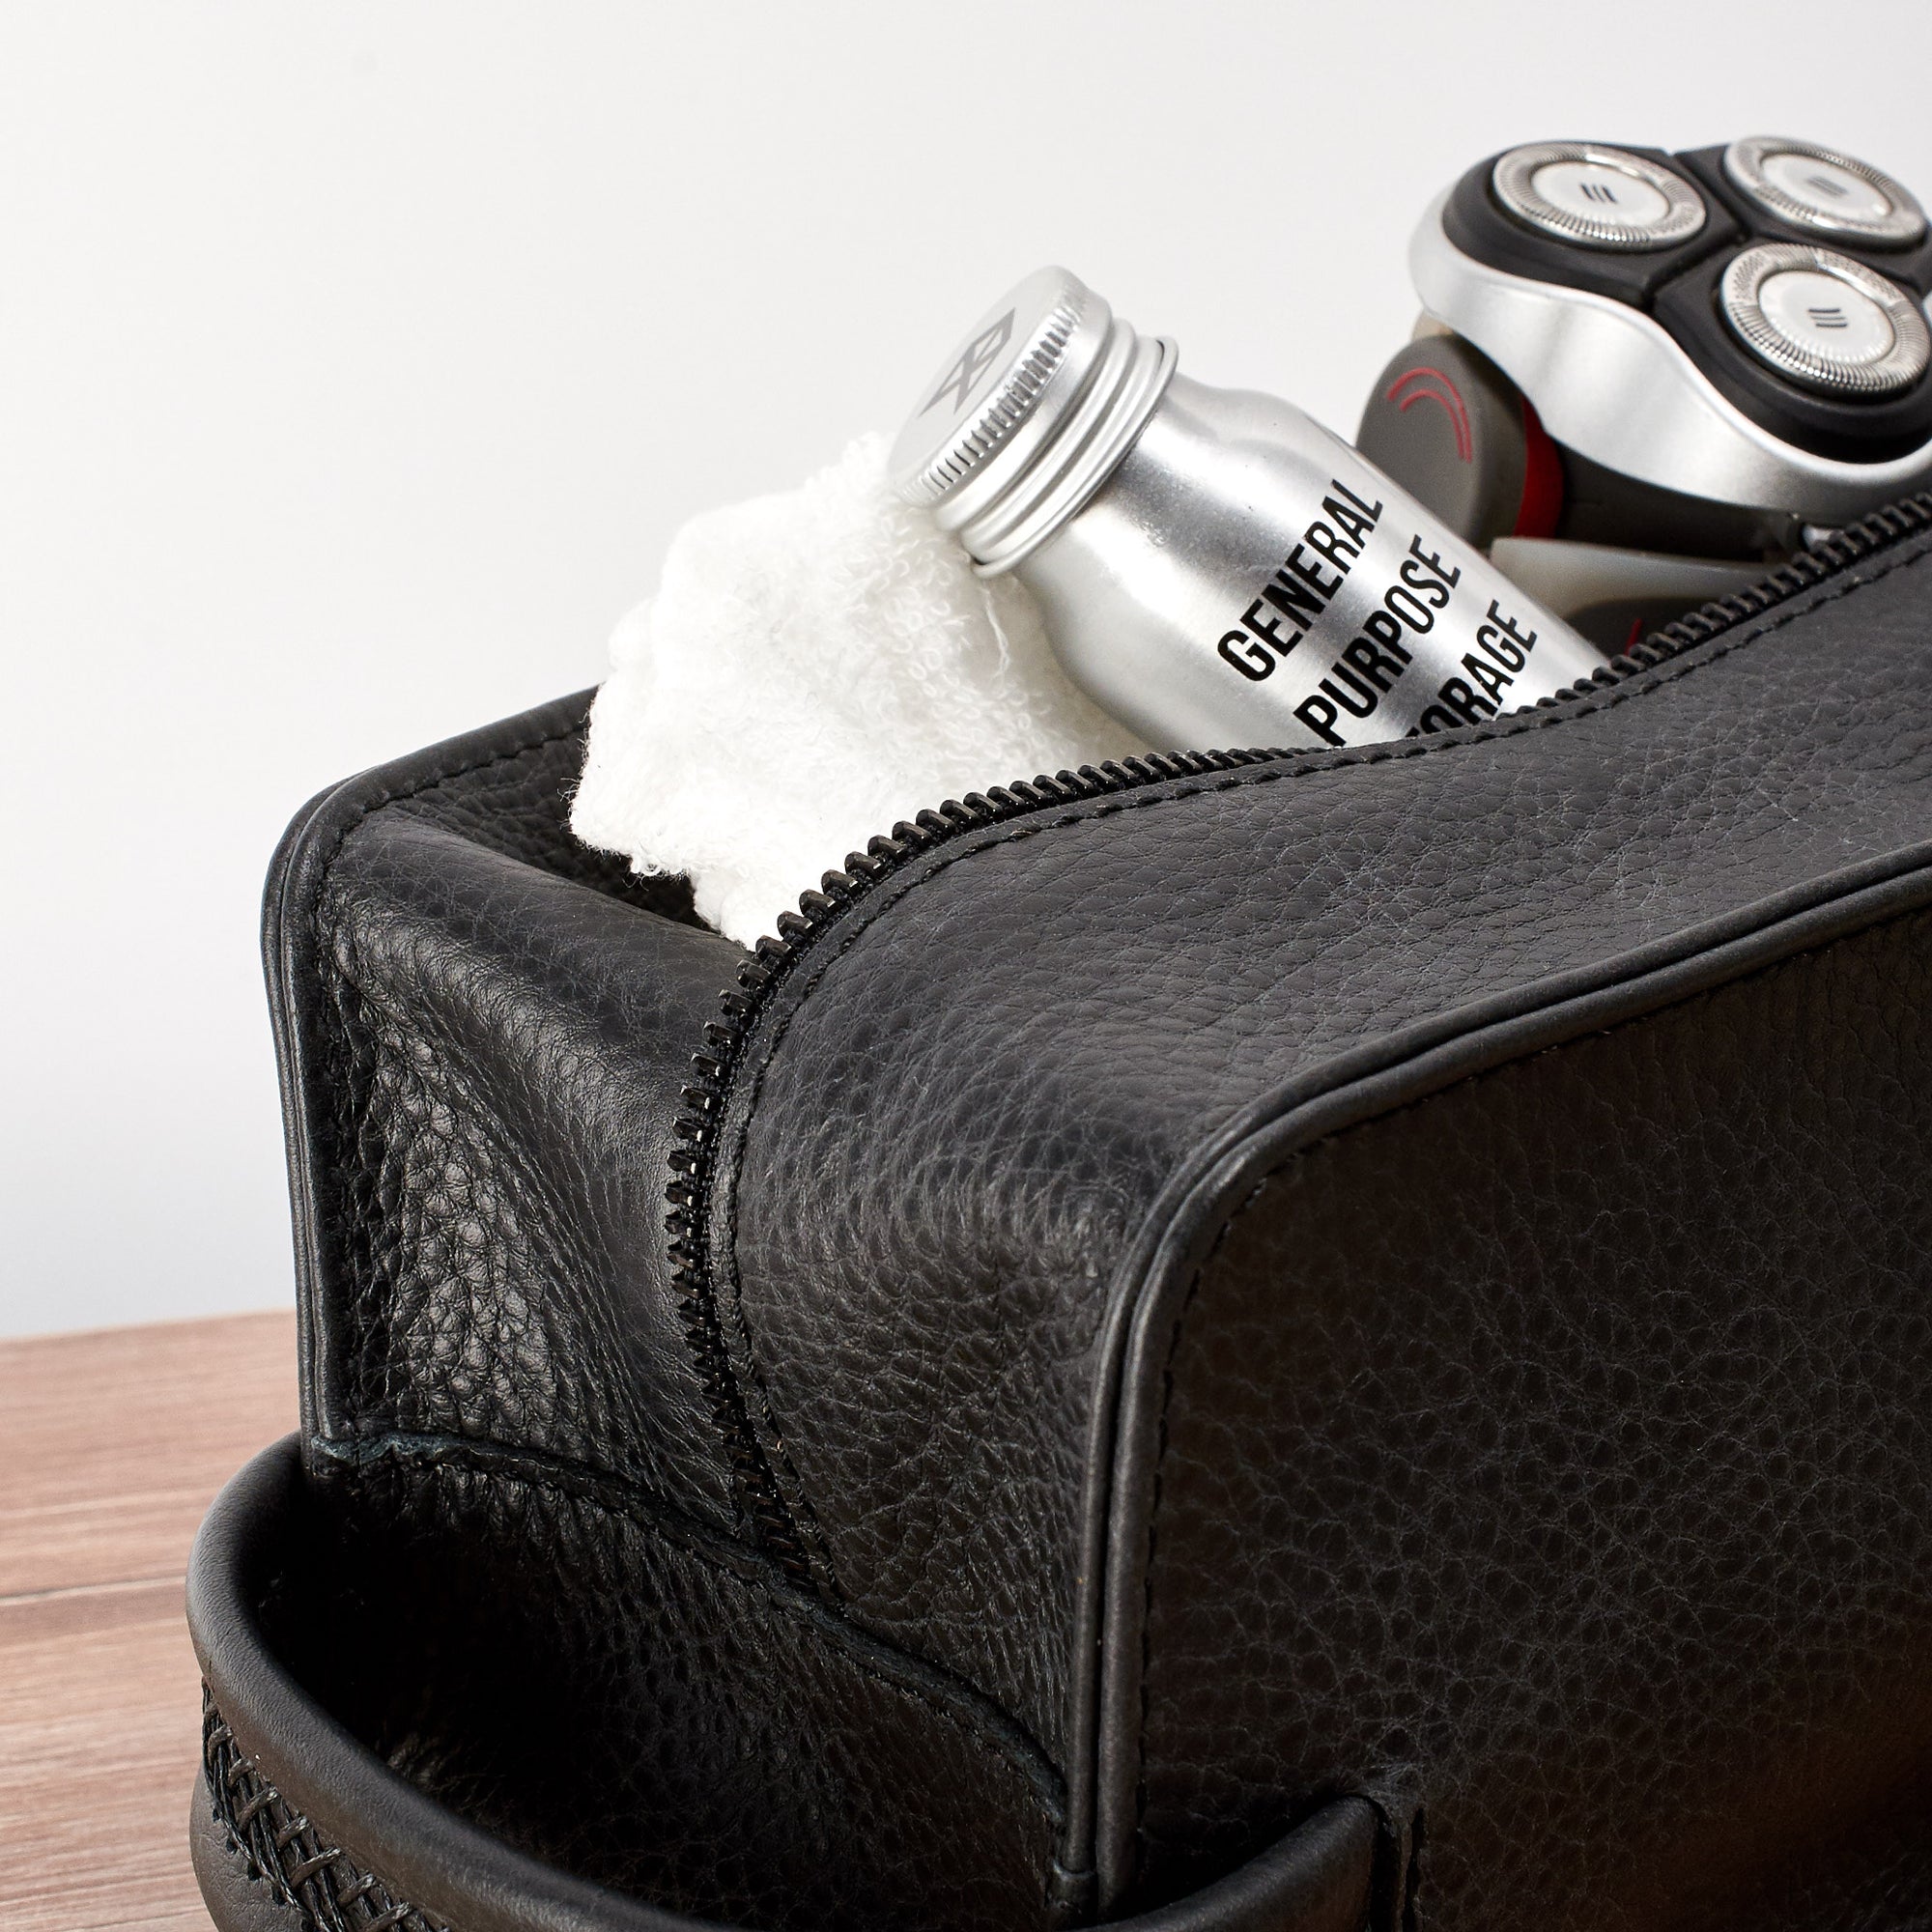 Dopp kit and toiletries. Black leather toiletry, shaving bag with hand stitched handle